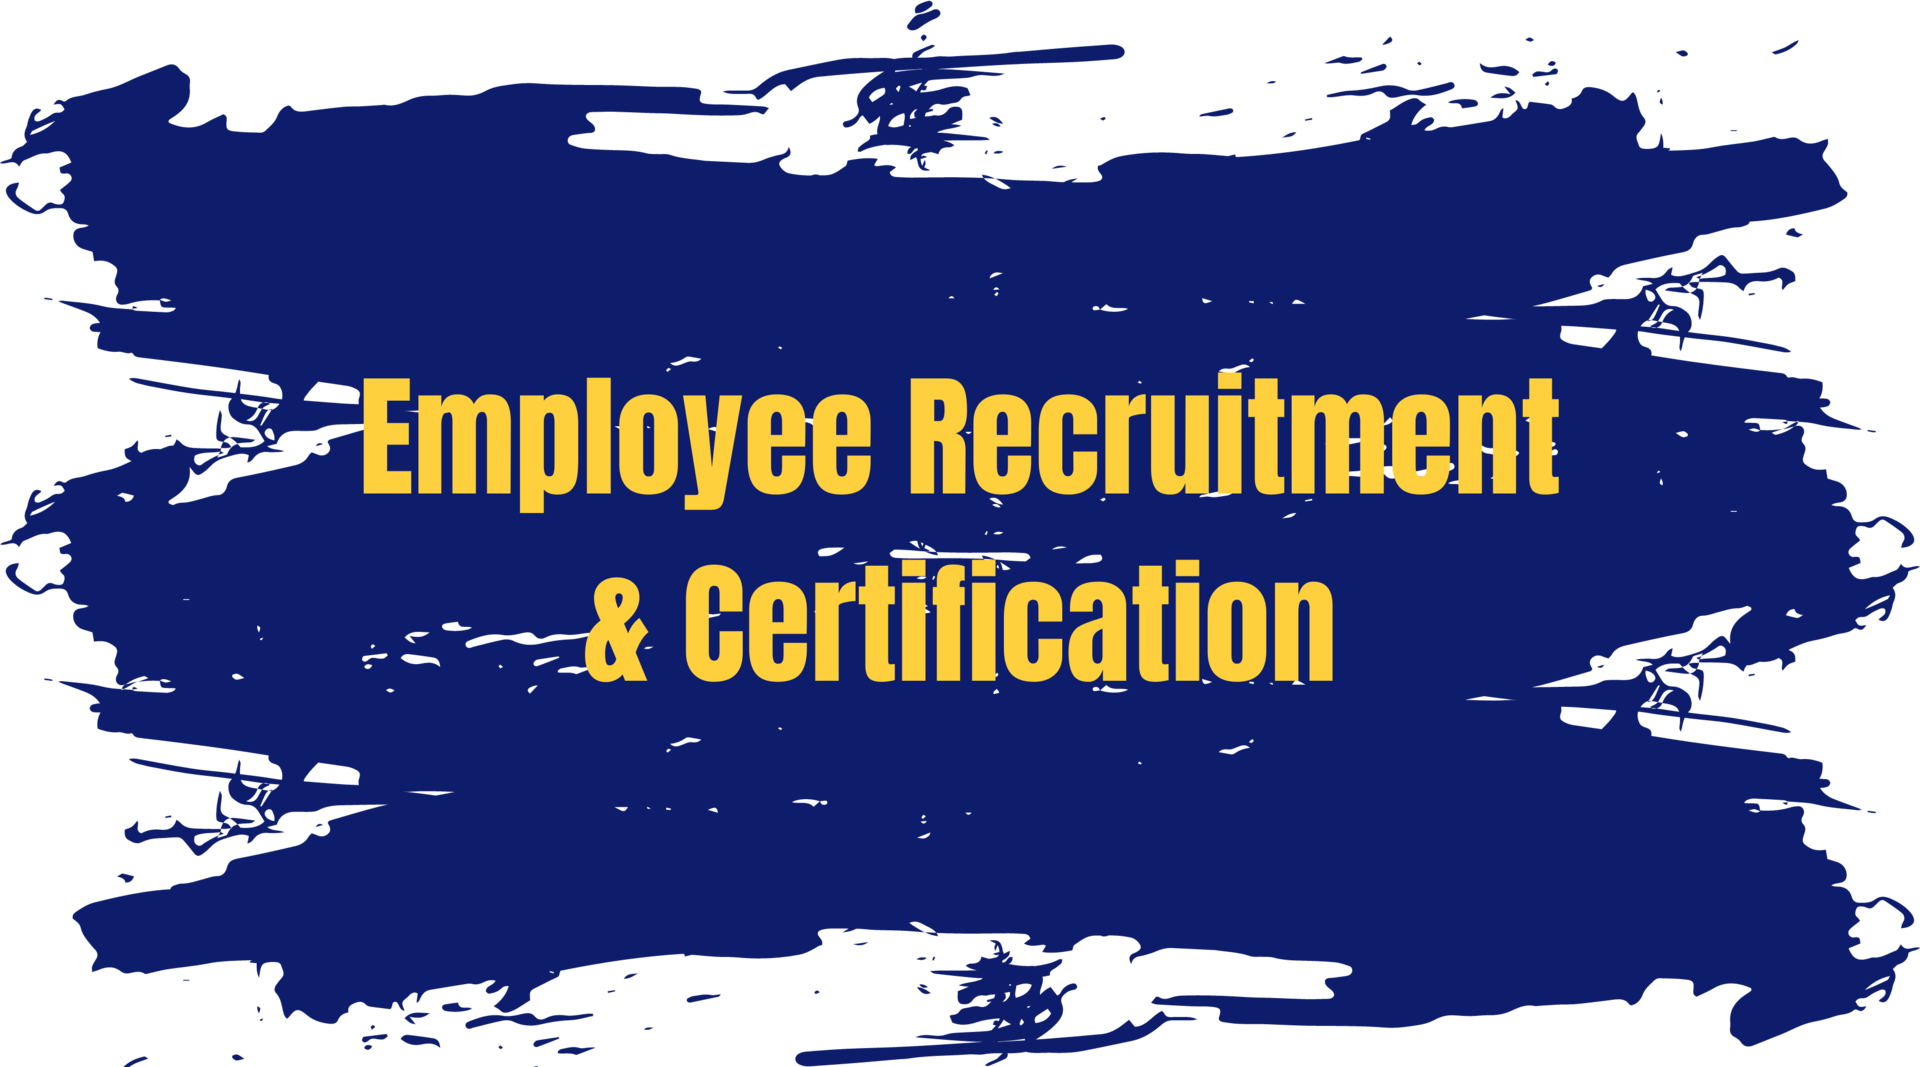 Employee Recruitment and Certification